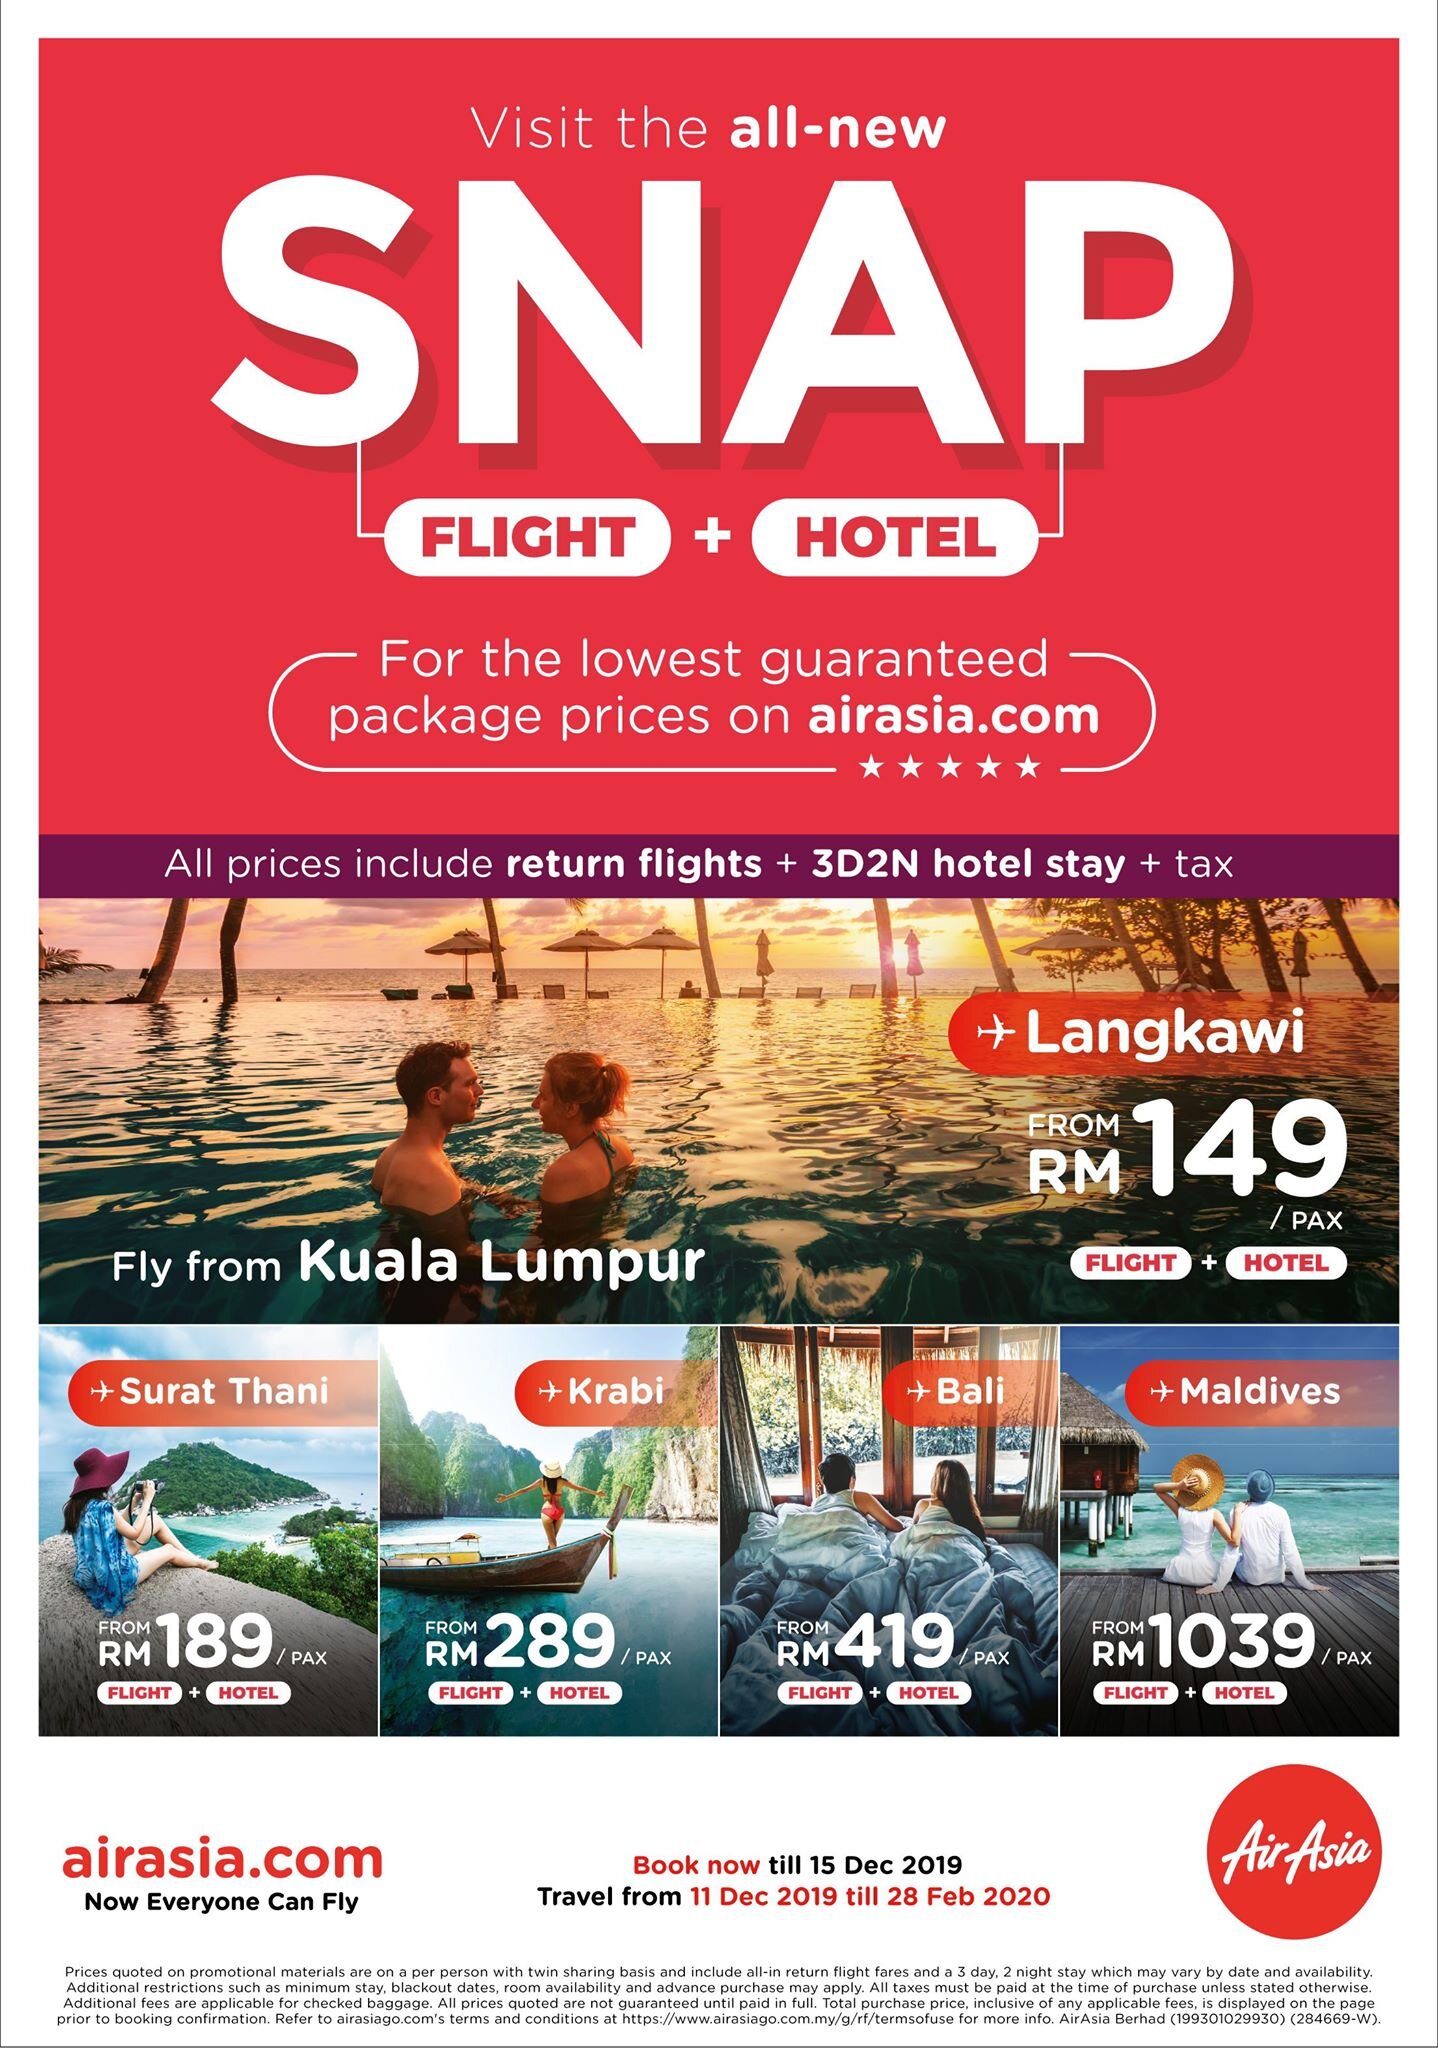 Airasia Com Offers Best Value For Money Flight Hotel Packages With Snap Airasia Newsroom